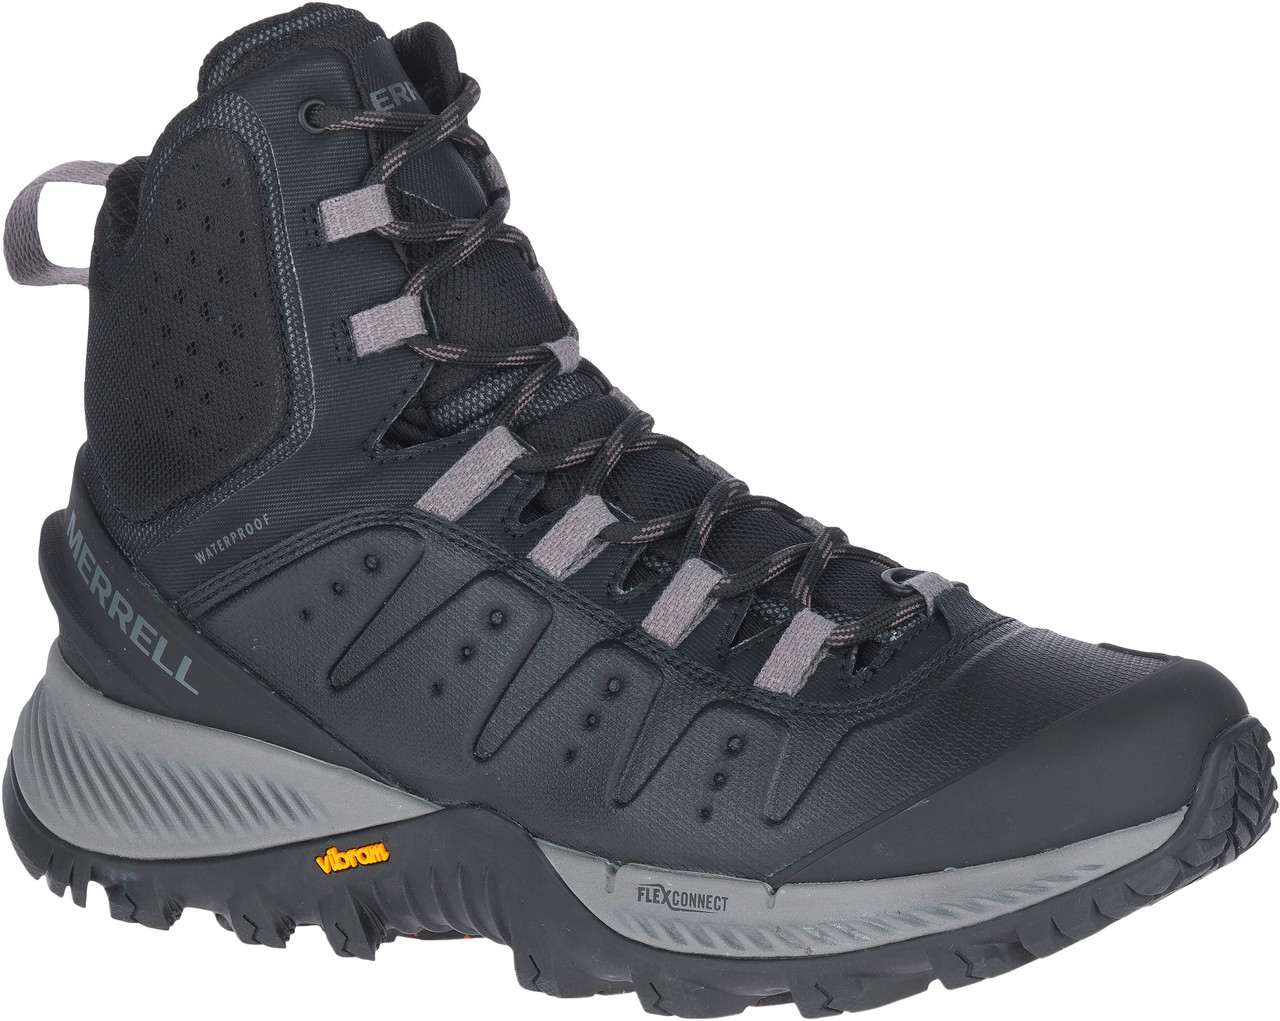 Thermo Cross 3 Mid Waterproof Winter Shoes Black